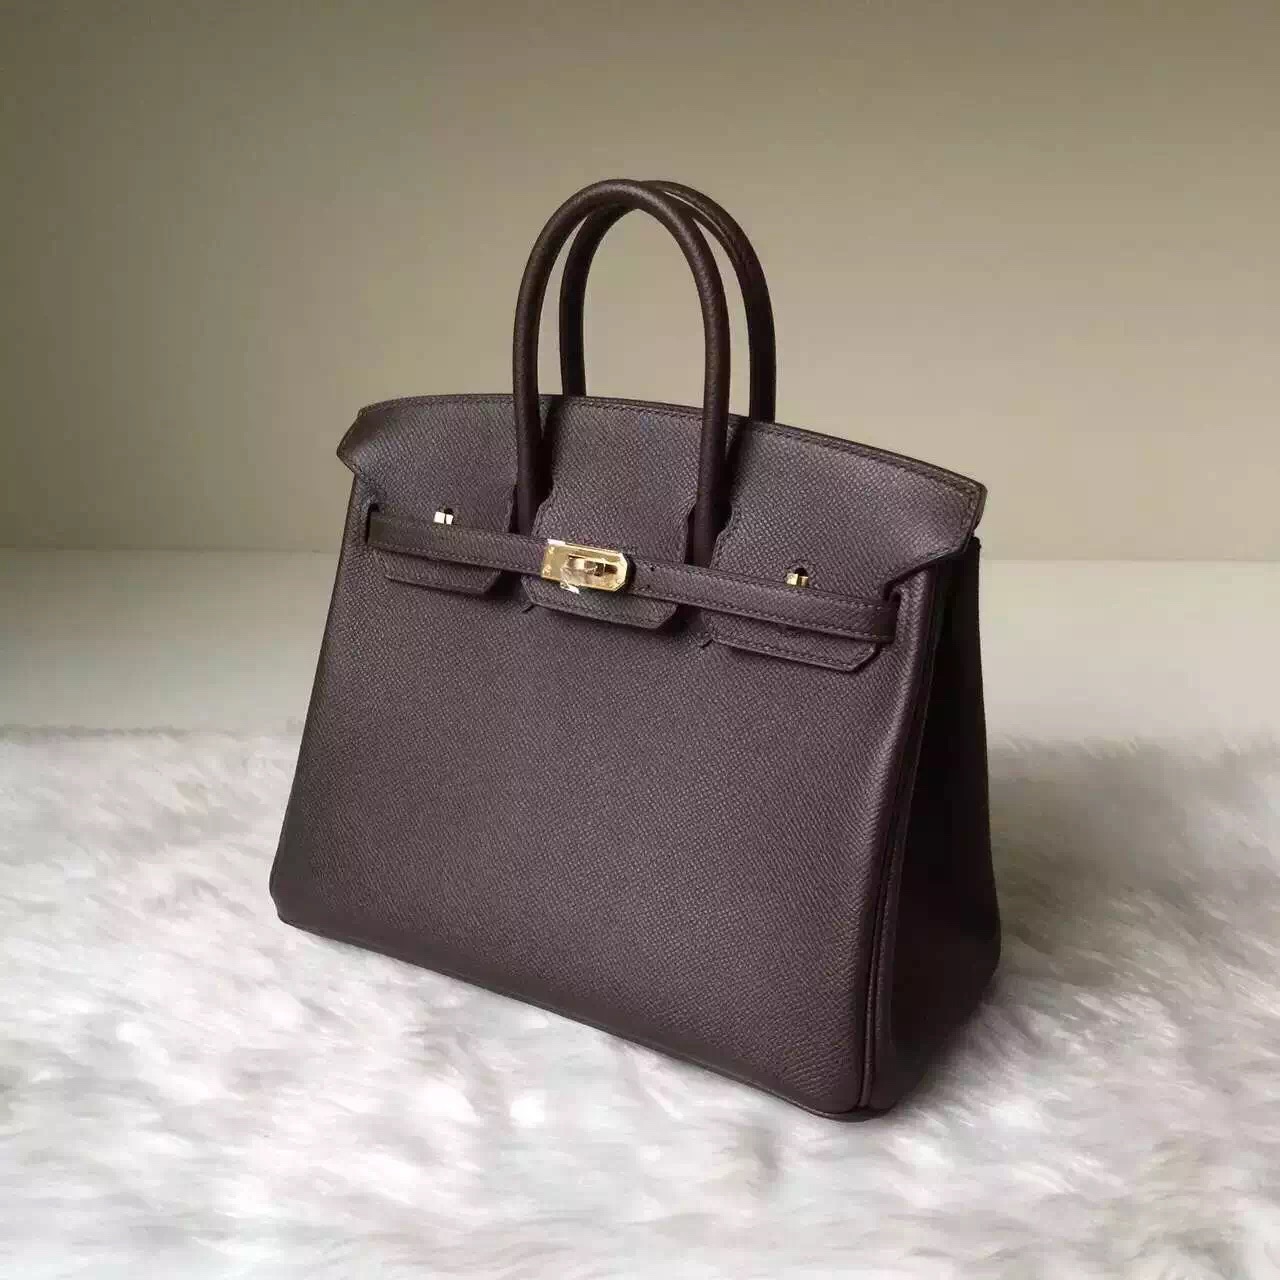 Hand Stitching Hermes Birkin25cm in Coffee Color Epsom Leather